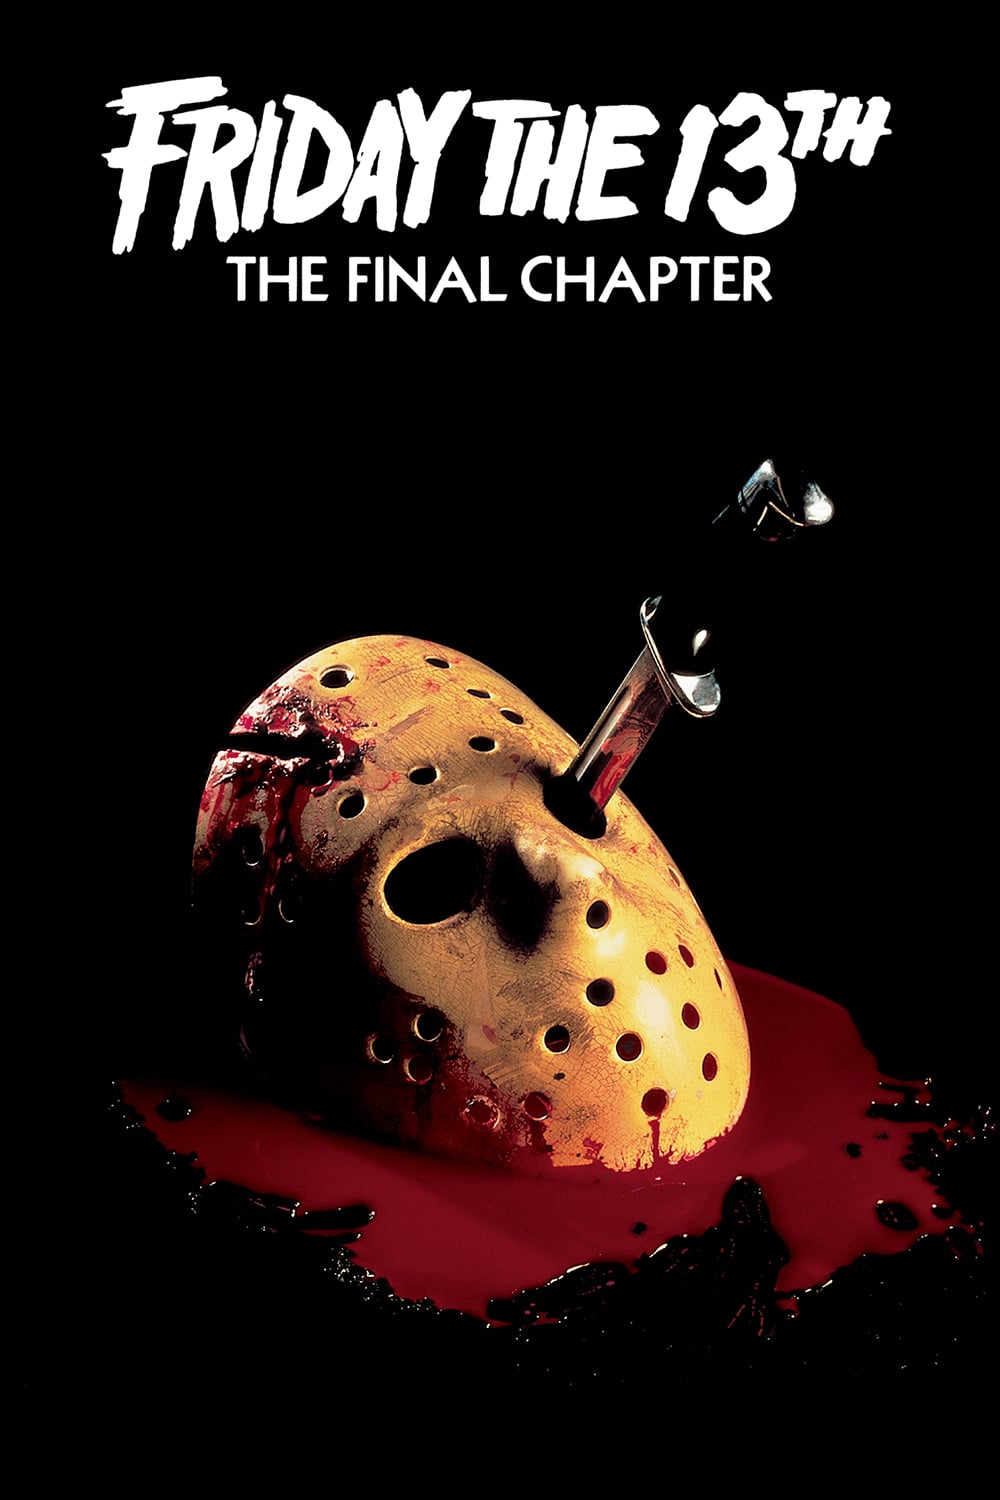 Poster for the movie "Friday the 13th: The Final Chapter"